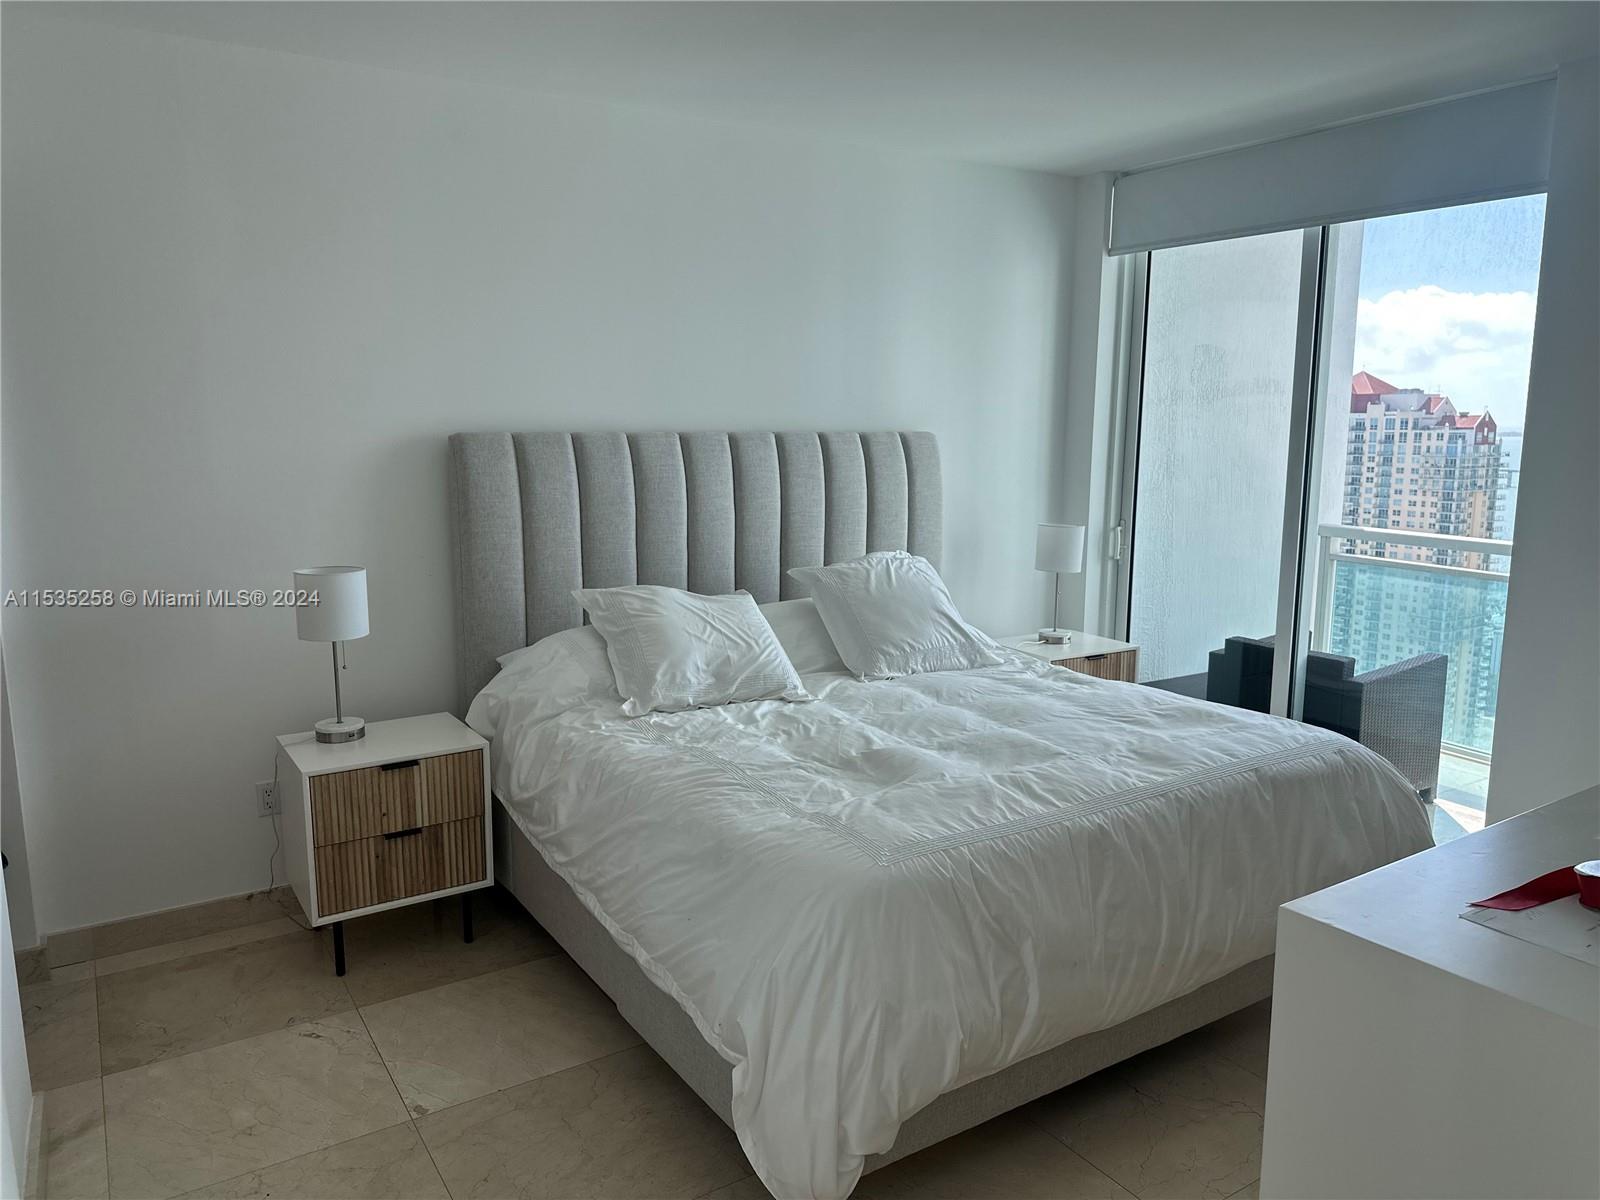 BEAUTIFUL 2/2 APARTMENT IN THE HEART OF BRICKELL, WATER AND CITY VIEW, TWO WALKING CLOSET, FITNESS CENTER, SPA BUSINESS CENTER, 24 HR VALET PARKING SERVICES, WALK TO BRICKELL CITY CENTRE, DOWN TOWN, BISCAYNE BAY, BRICKELL KEY, ETC
NOT PETS ALLOWED